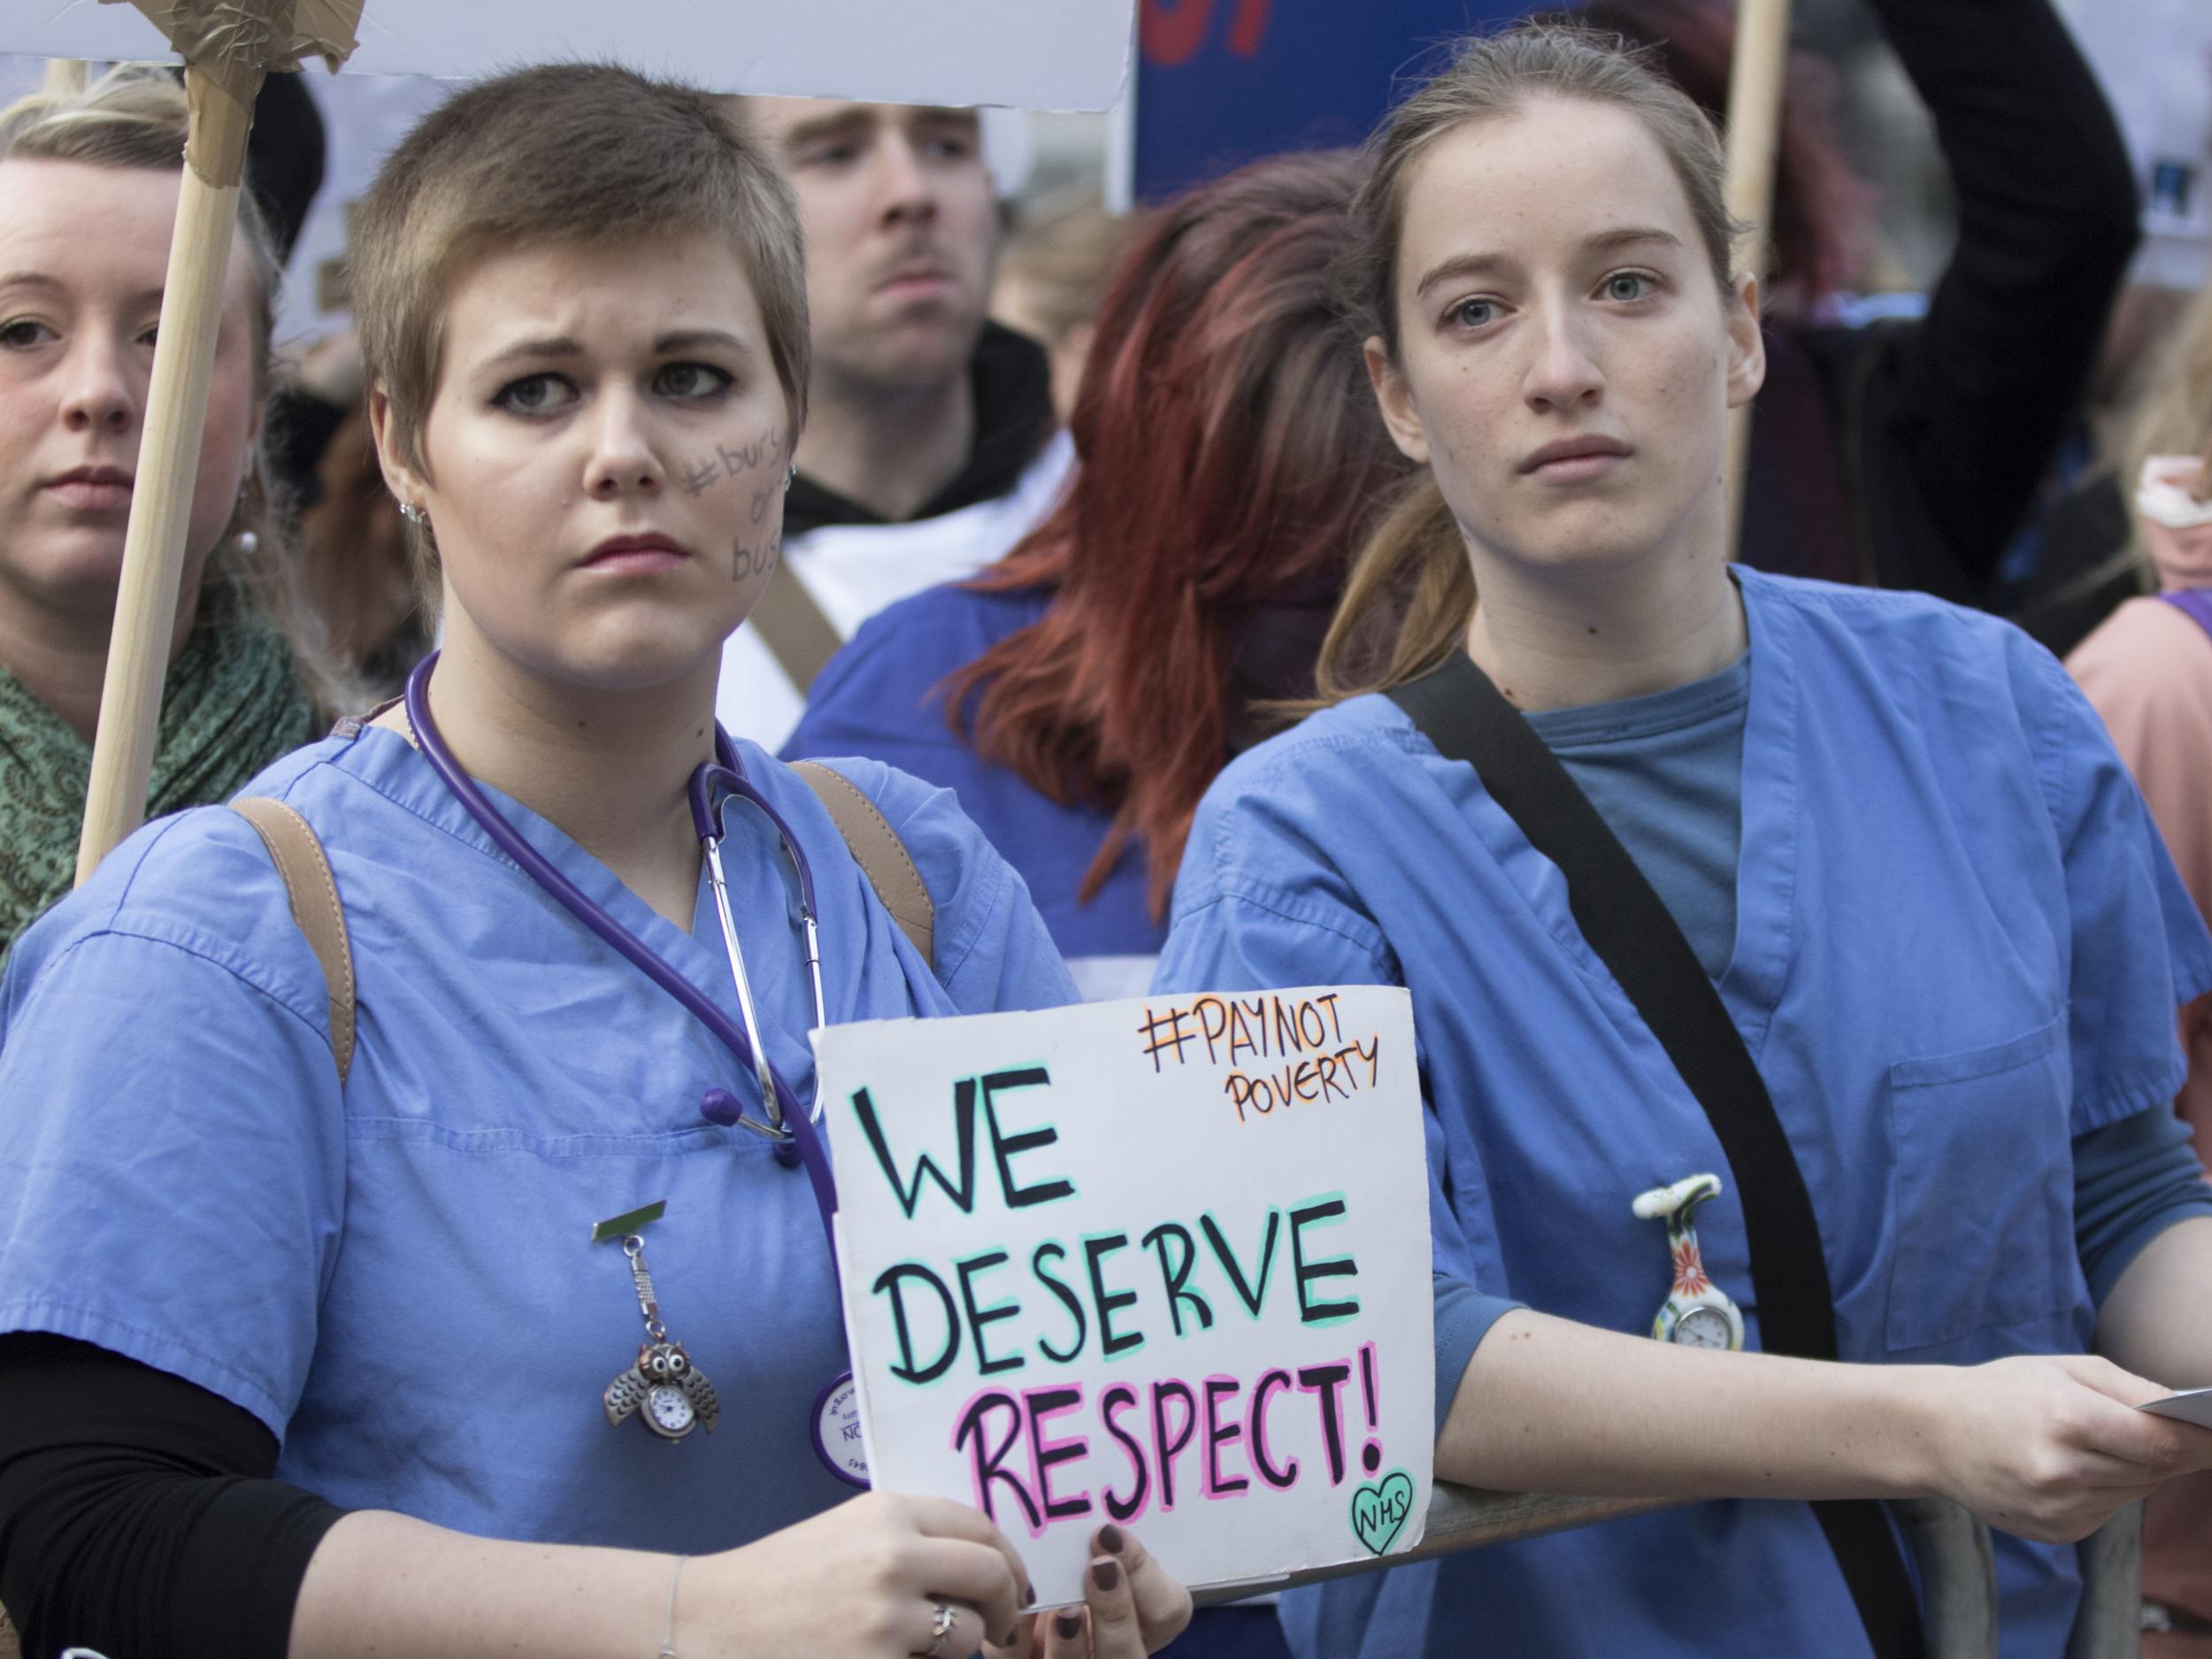 Nurses and midwives have protested over pay and the scrapping of bursaries